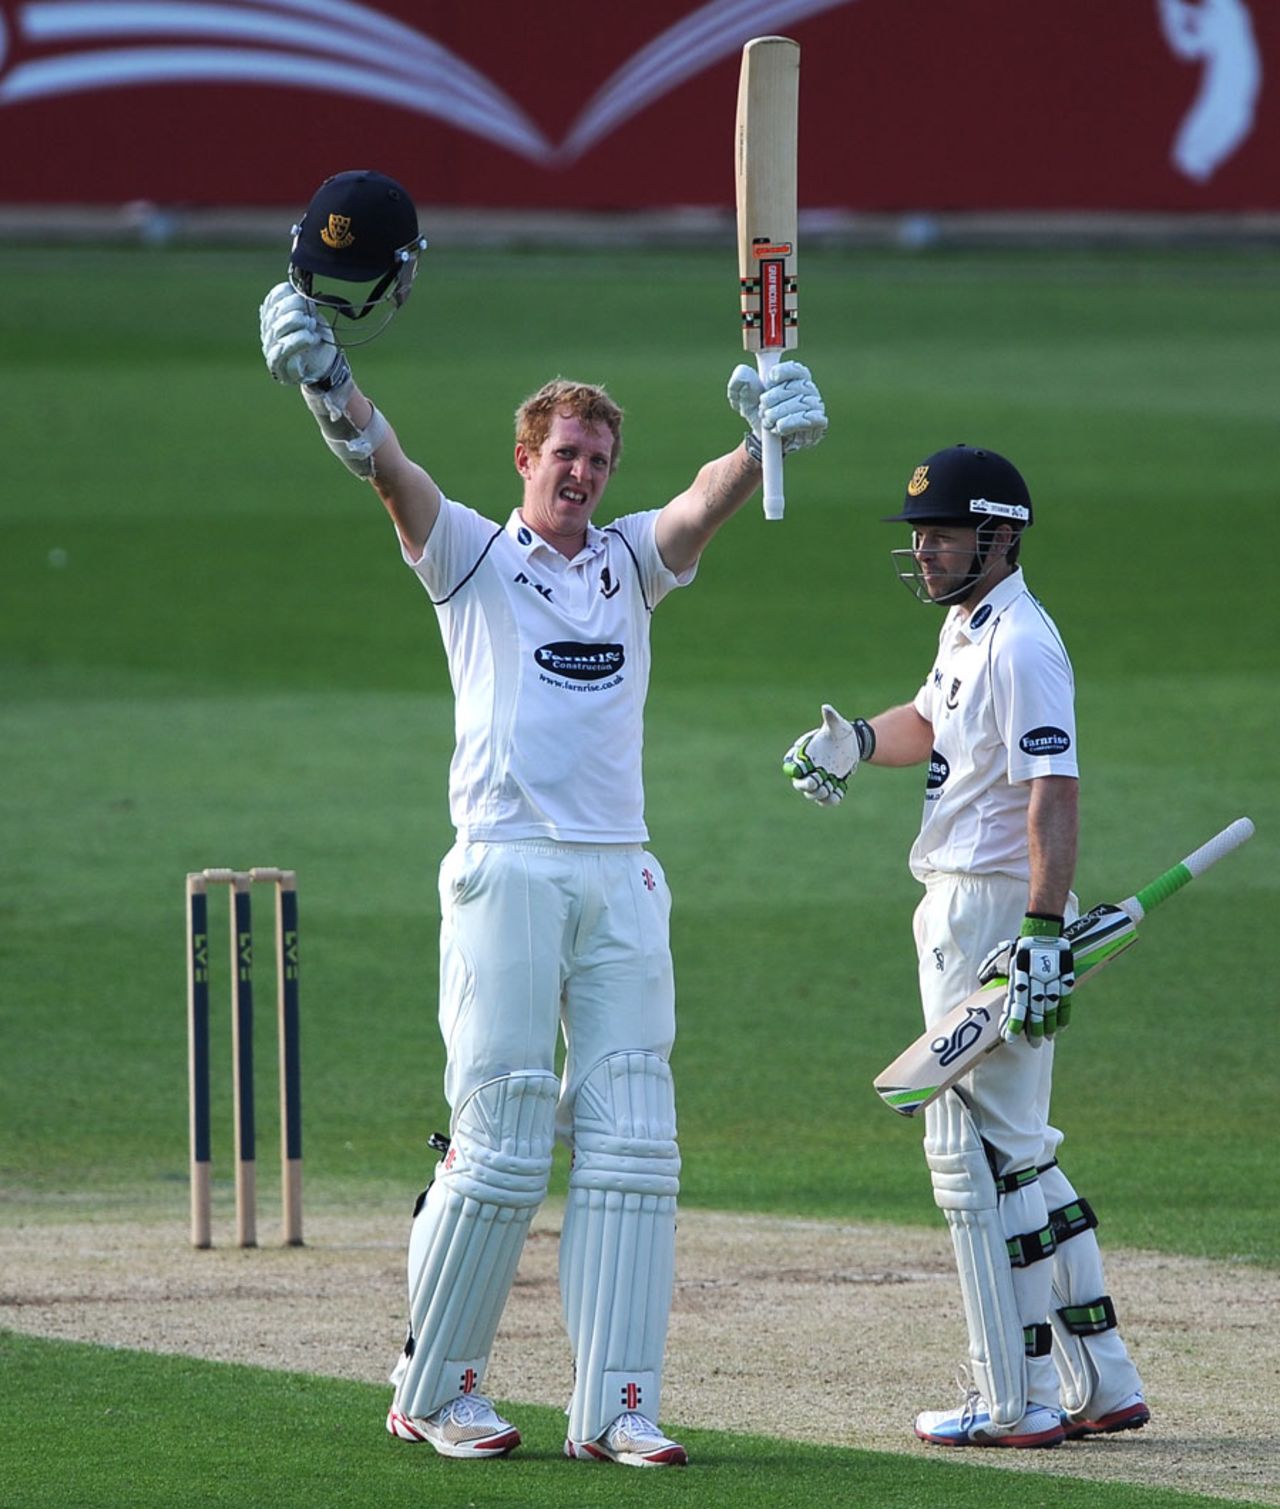 Luke Wells reached his sixth first-class hundred, Surrey v Sussex, County Championship, Division One, The Oval, 2nd day, April 25, 2013